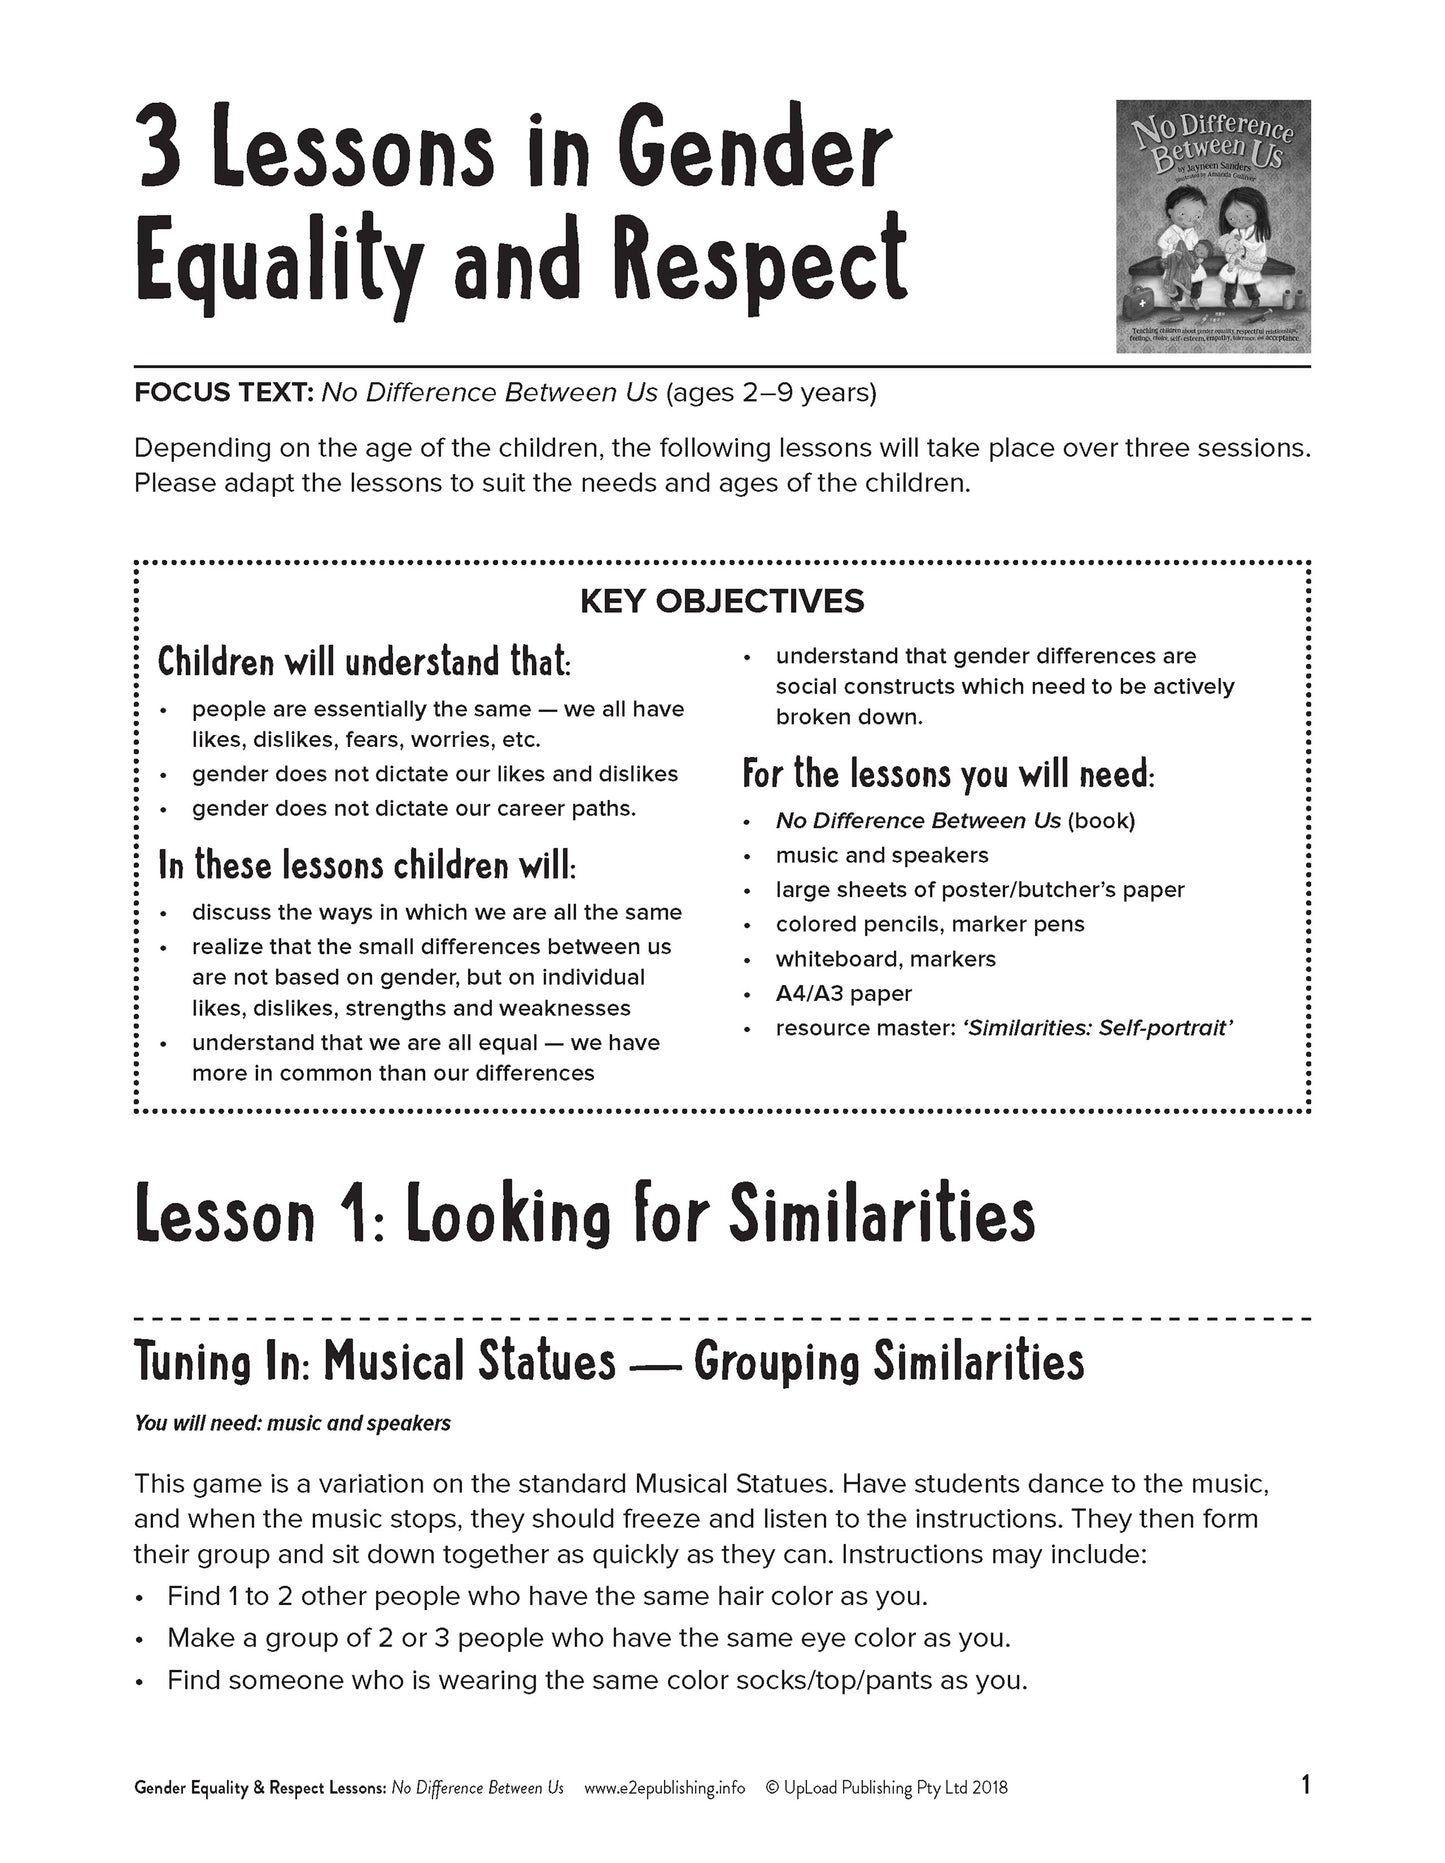 An example image of one of the lesson plan that compliment many of Educate2Empowers books.